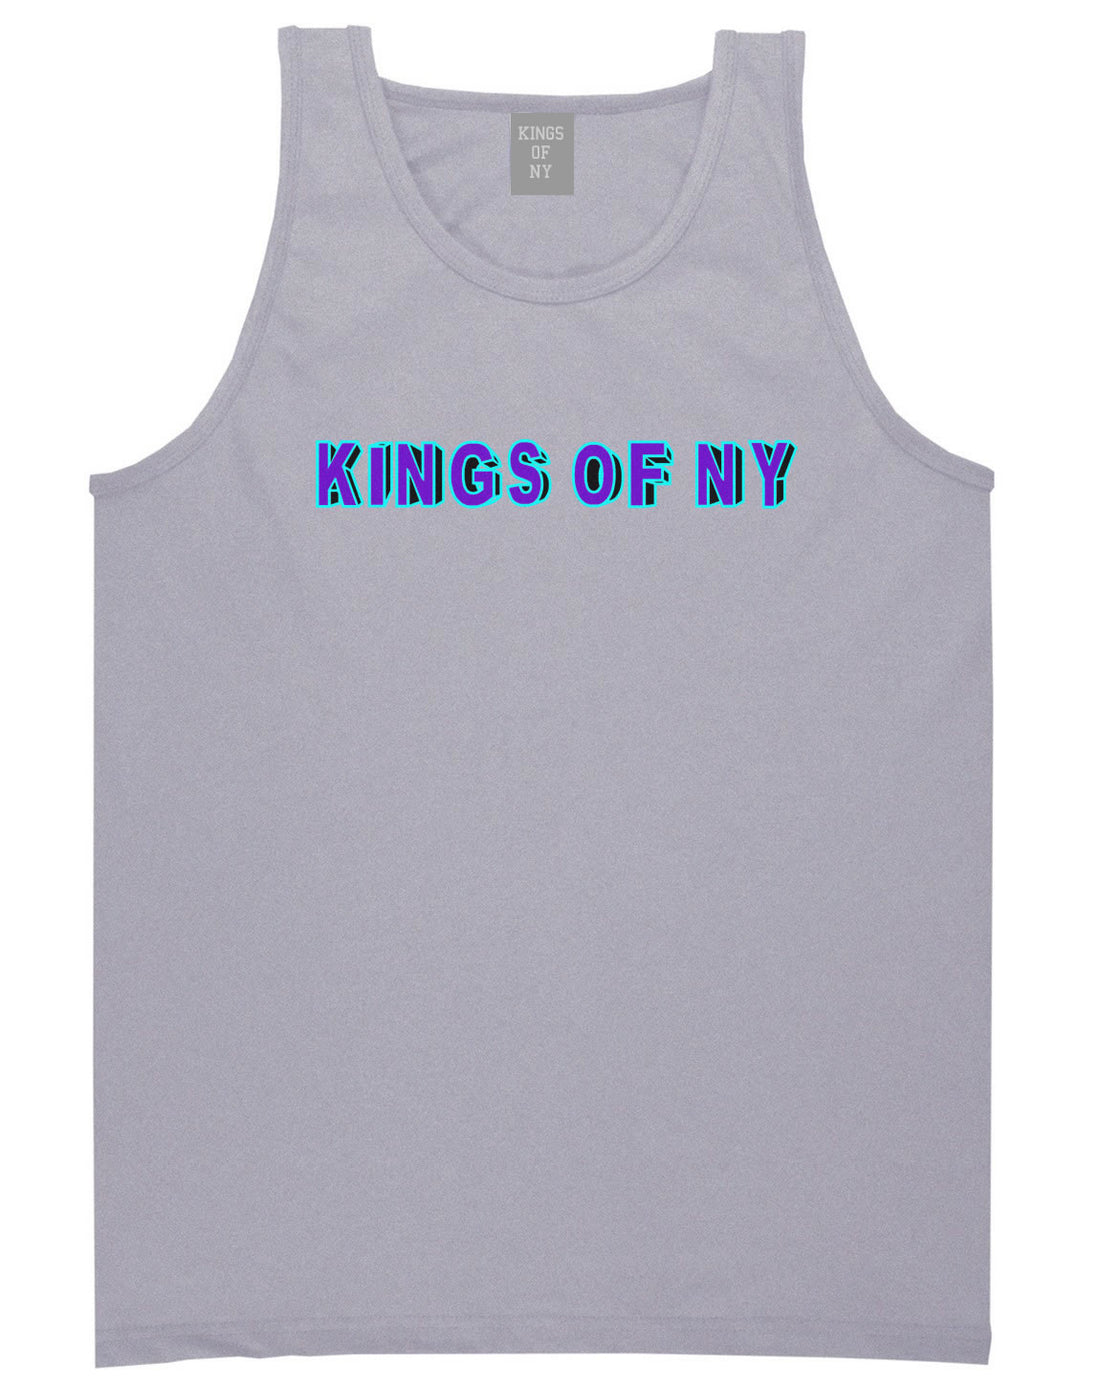 Bright Block Letters Tank Top in Grey by Kings Of NY